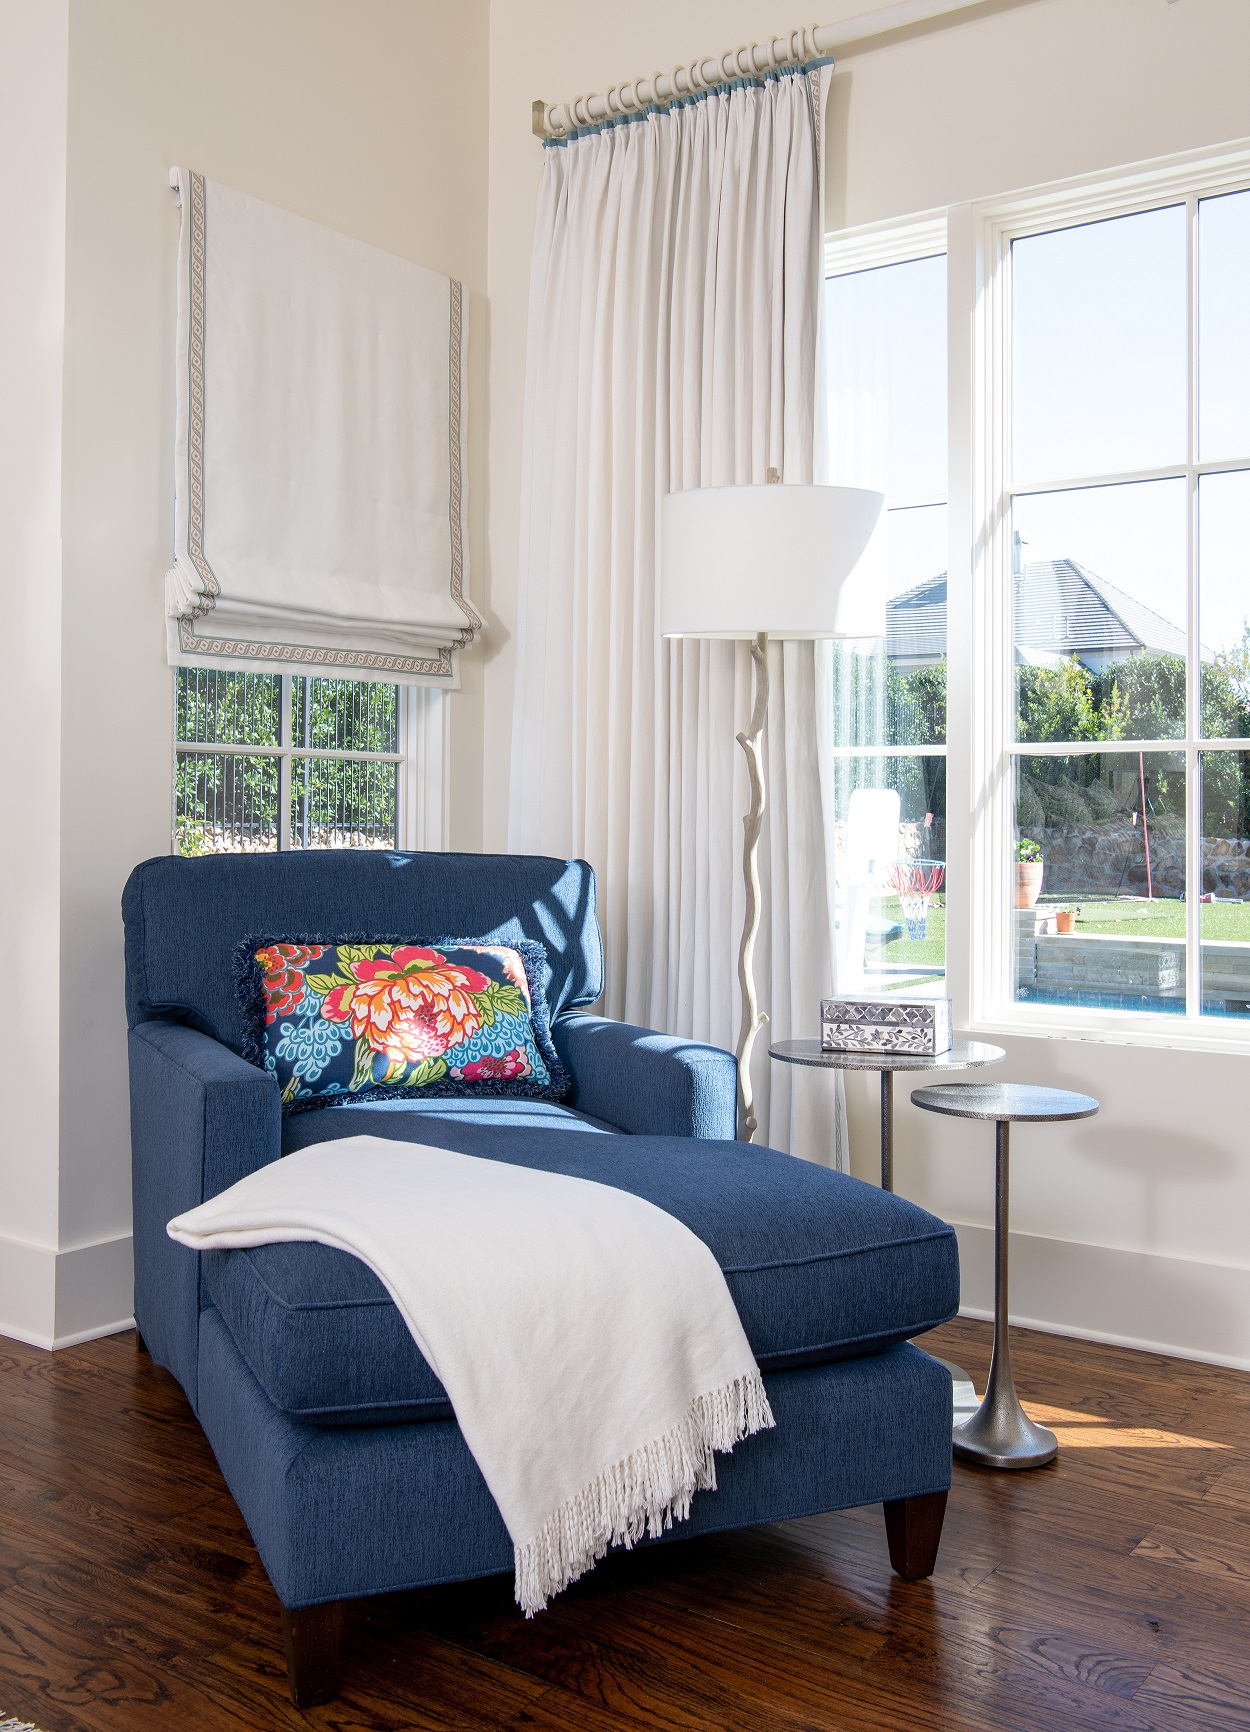 A blue upholstered chaise in a transitional style is the focal point of the room. The chaise is positioned in front of a window, with a white roman shade and drapes in another window. The floor is a deep brown hardwood, and the walls are white. A colourful floral kidney pillow and a white throw are placed on the chaise. Two drinks tables finished in brushed nickel are situated near the chaise, with a silver and white floor lamp nearby. The room is well-lit and the blue chaise adds a pop of color to the space.